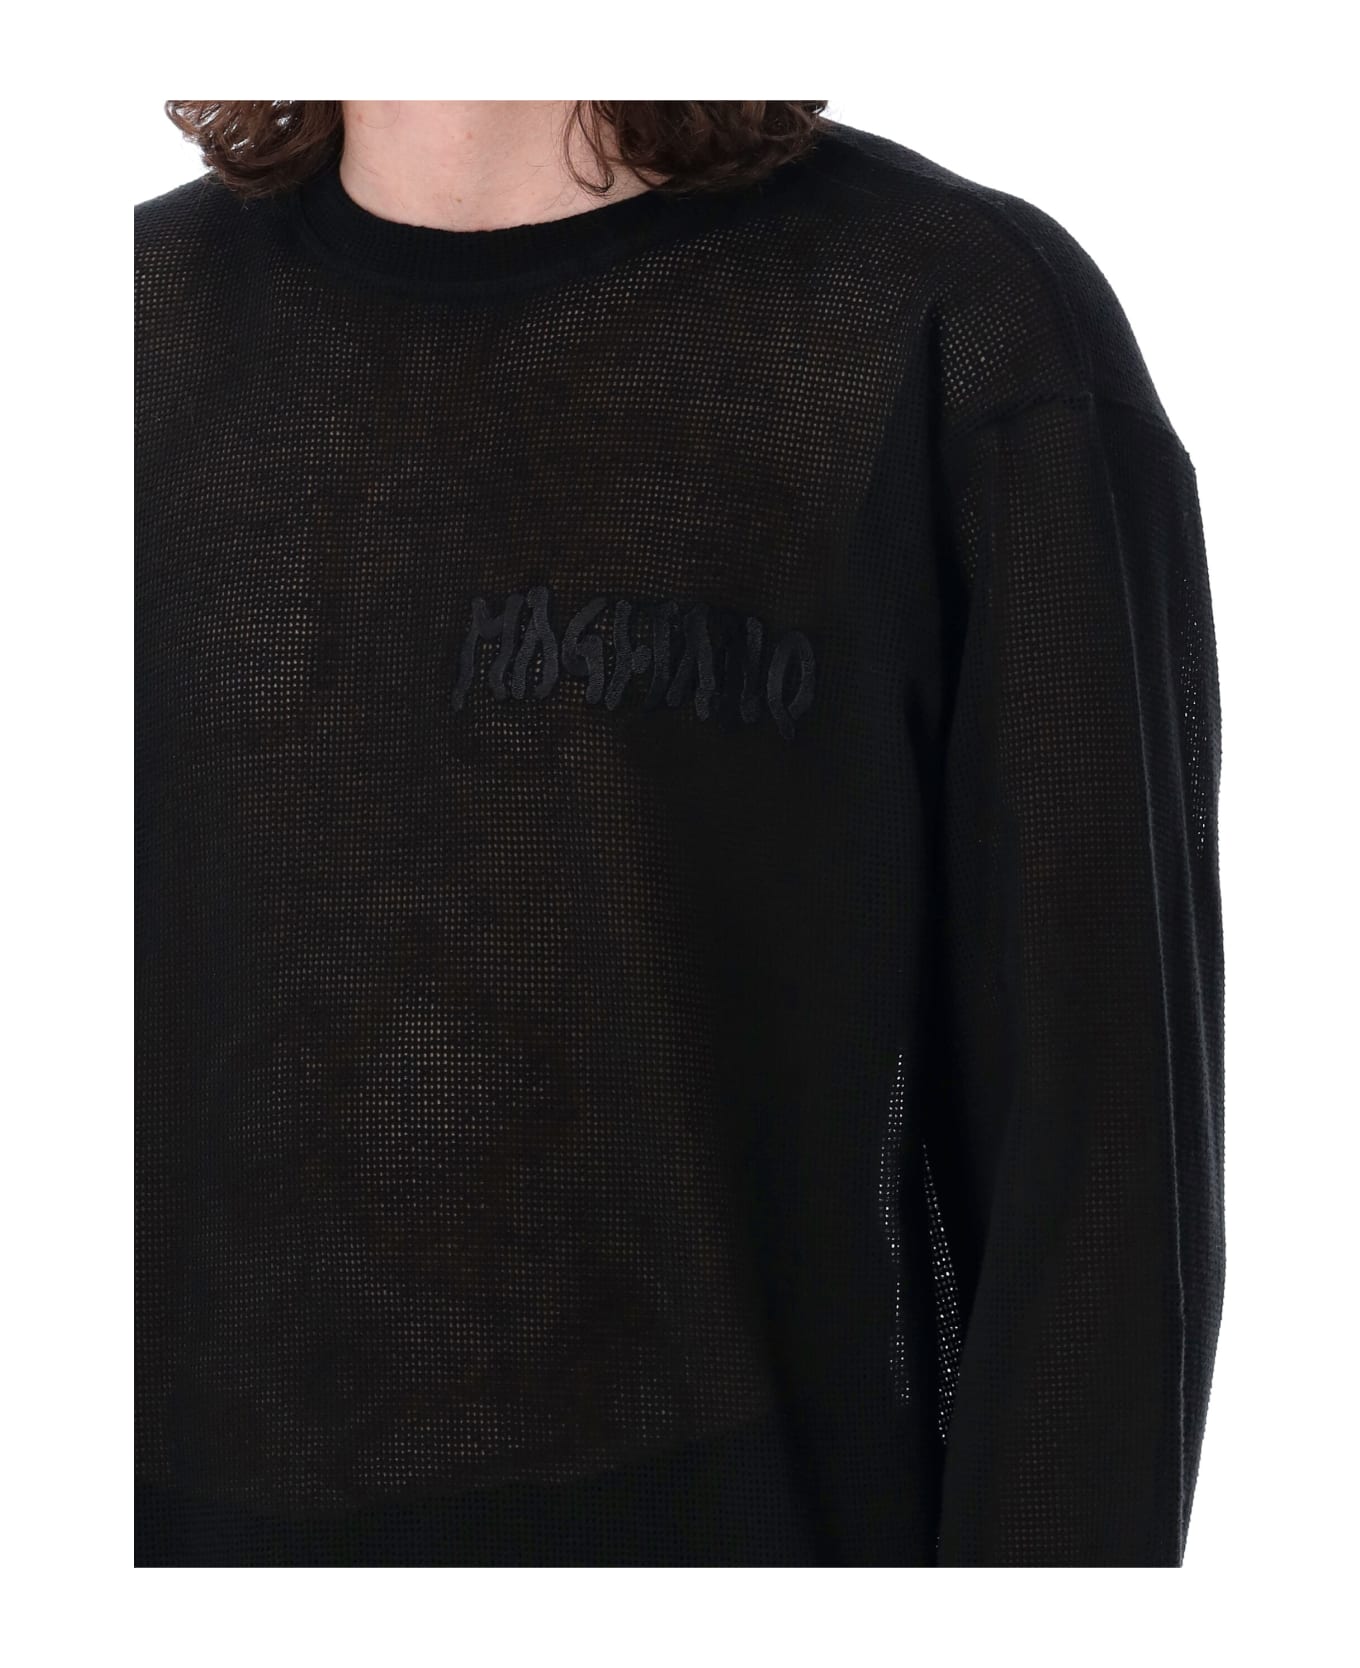 Magliano Knitted Sweater - BLACK ニットウェア